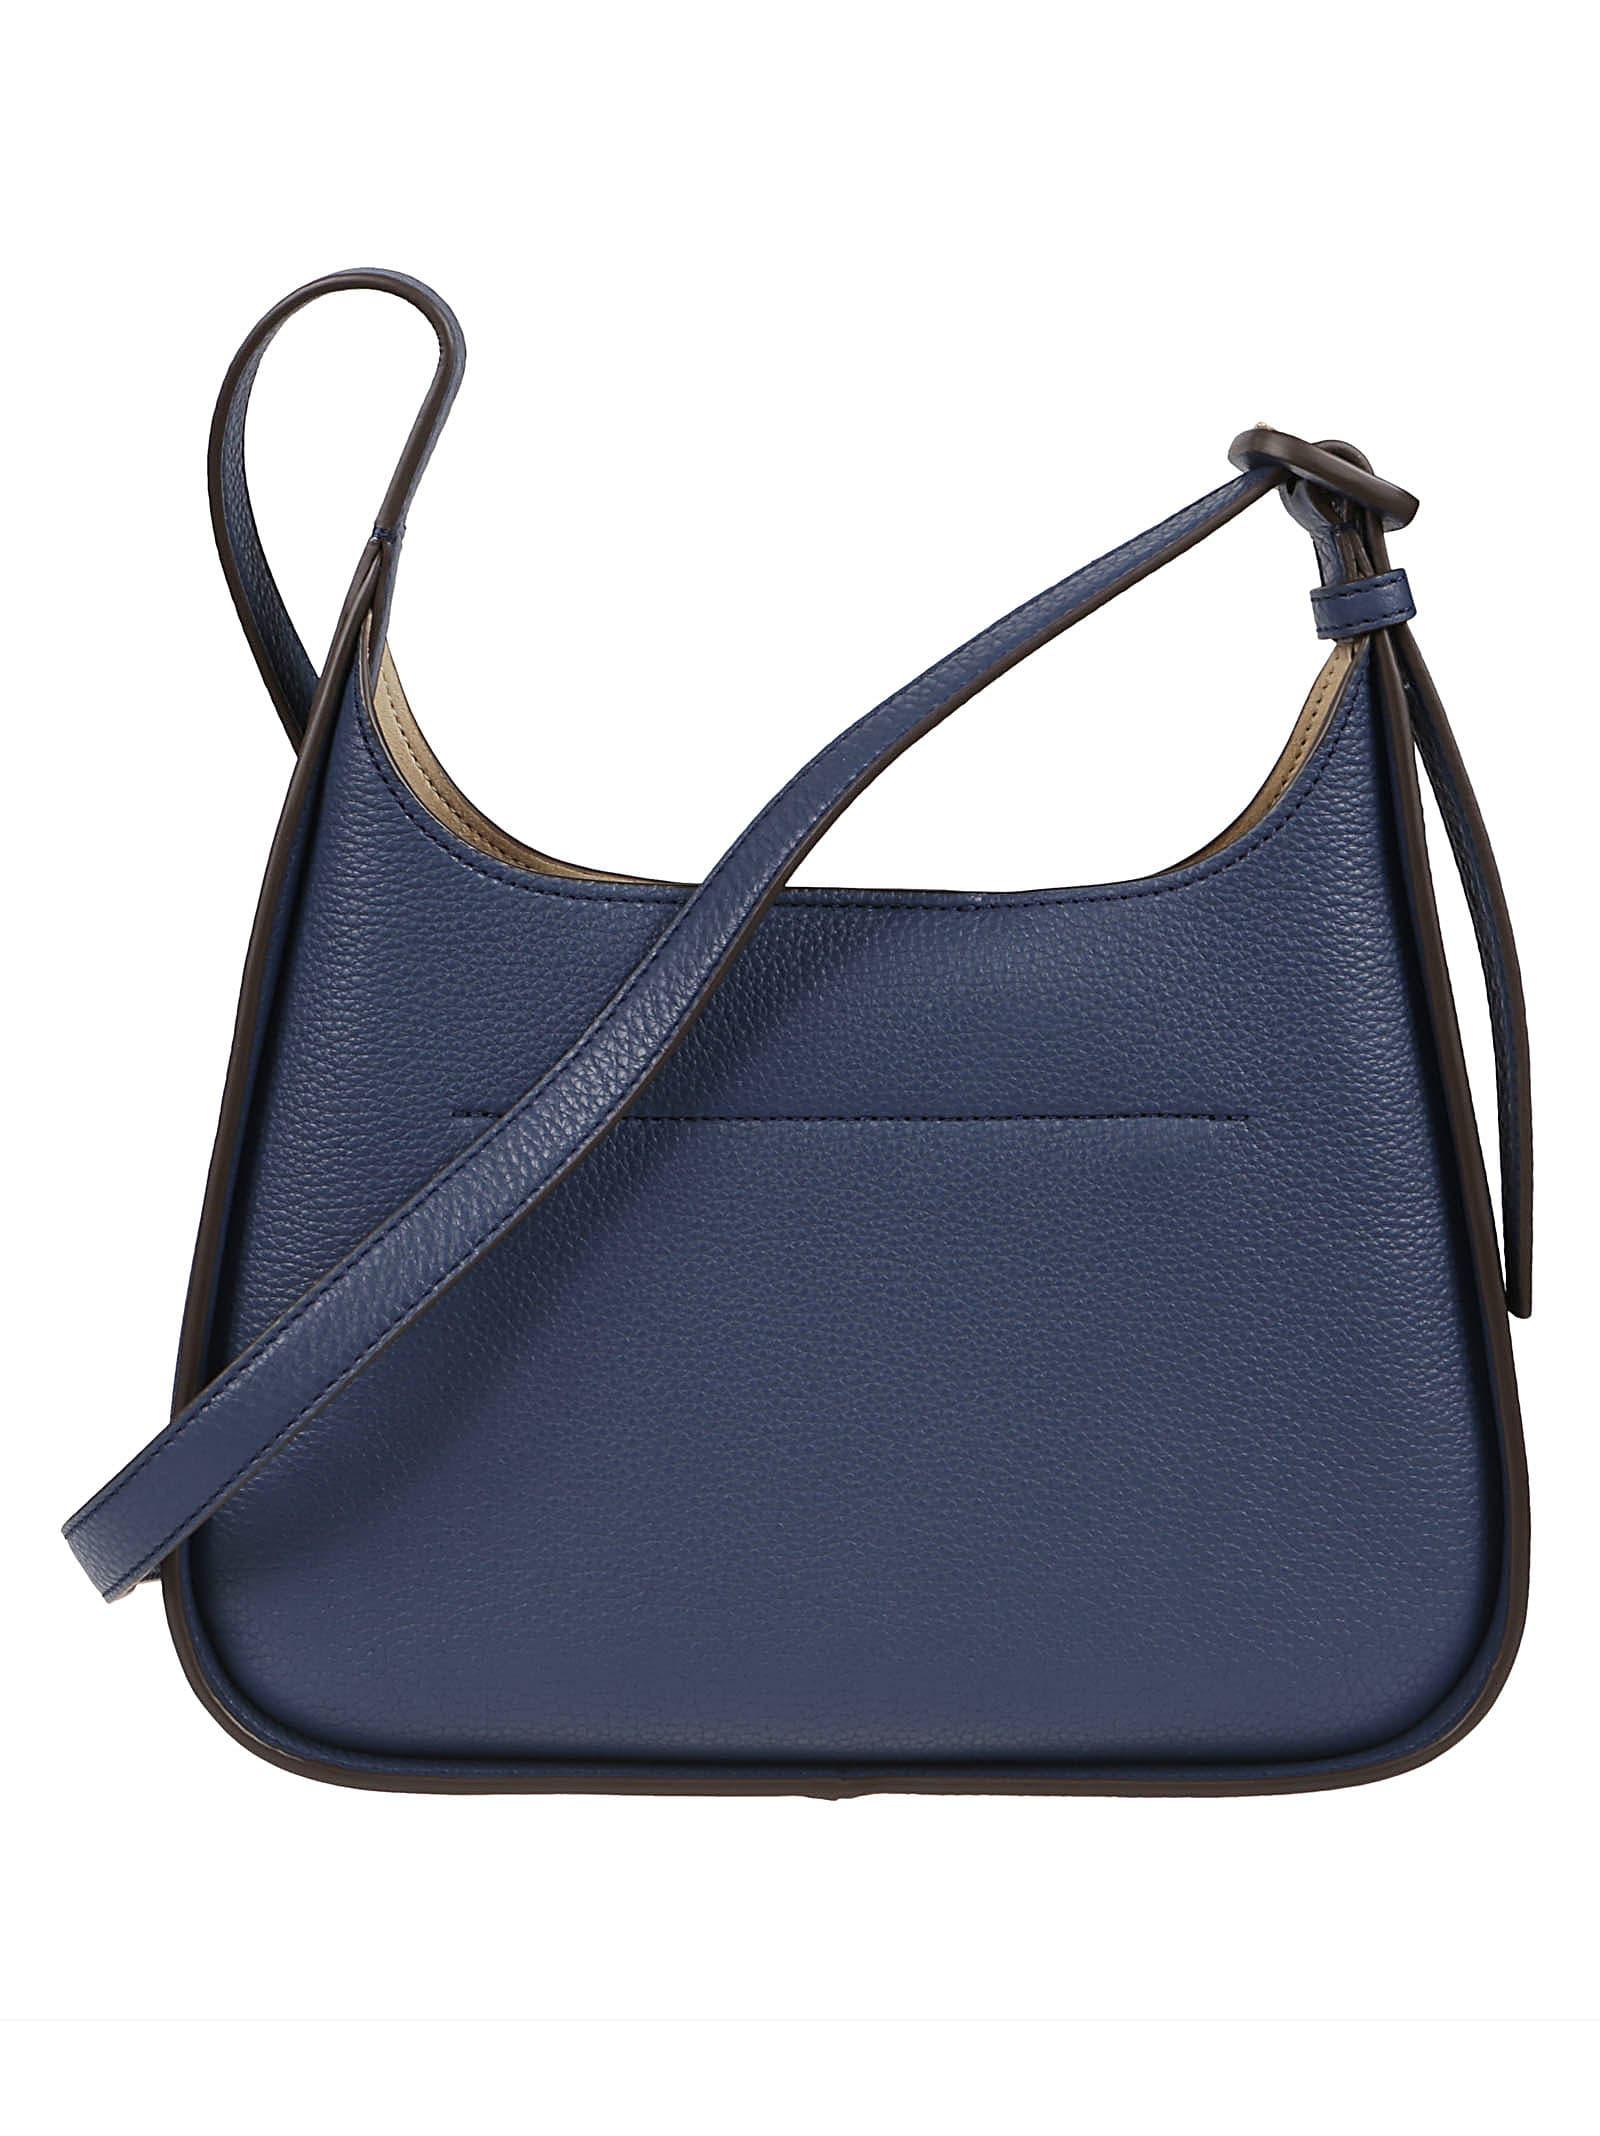 Tory Burch Leather Miller Small Classic Shoulder Bag in Blue - Save ...